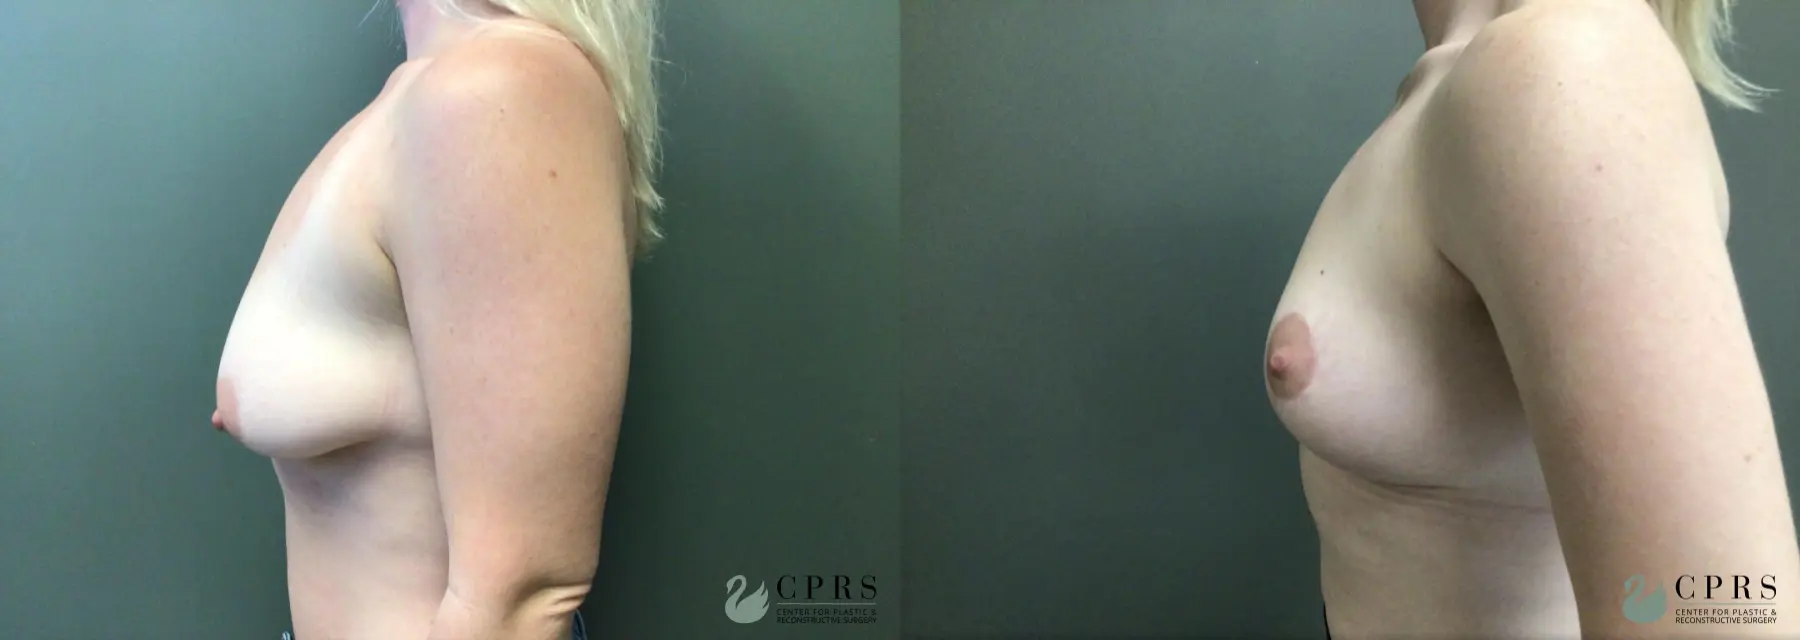 Breast Lift: Patient 7 - Before and After 3